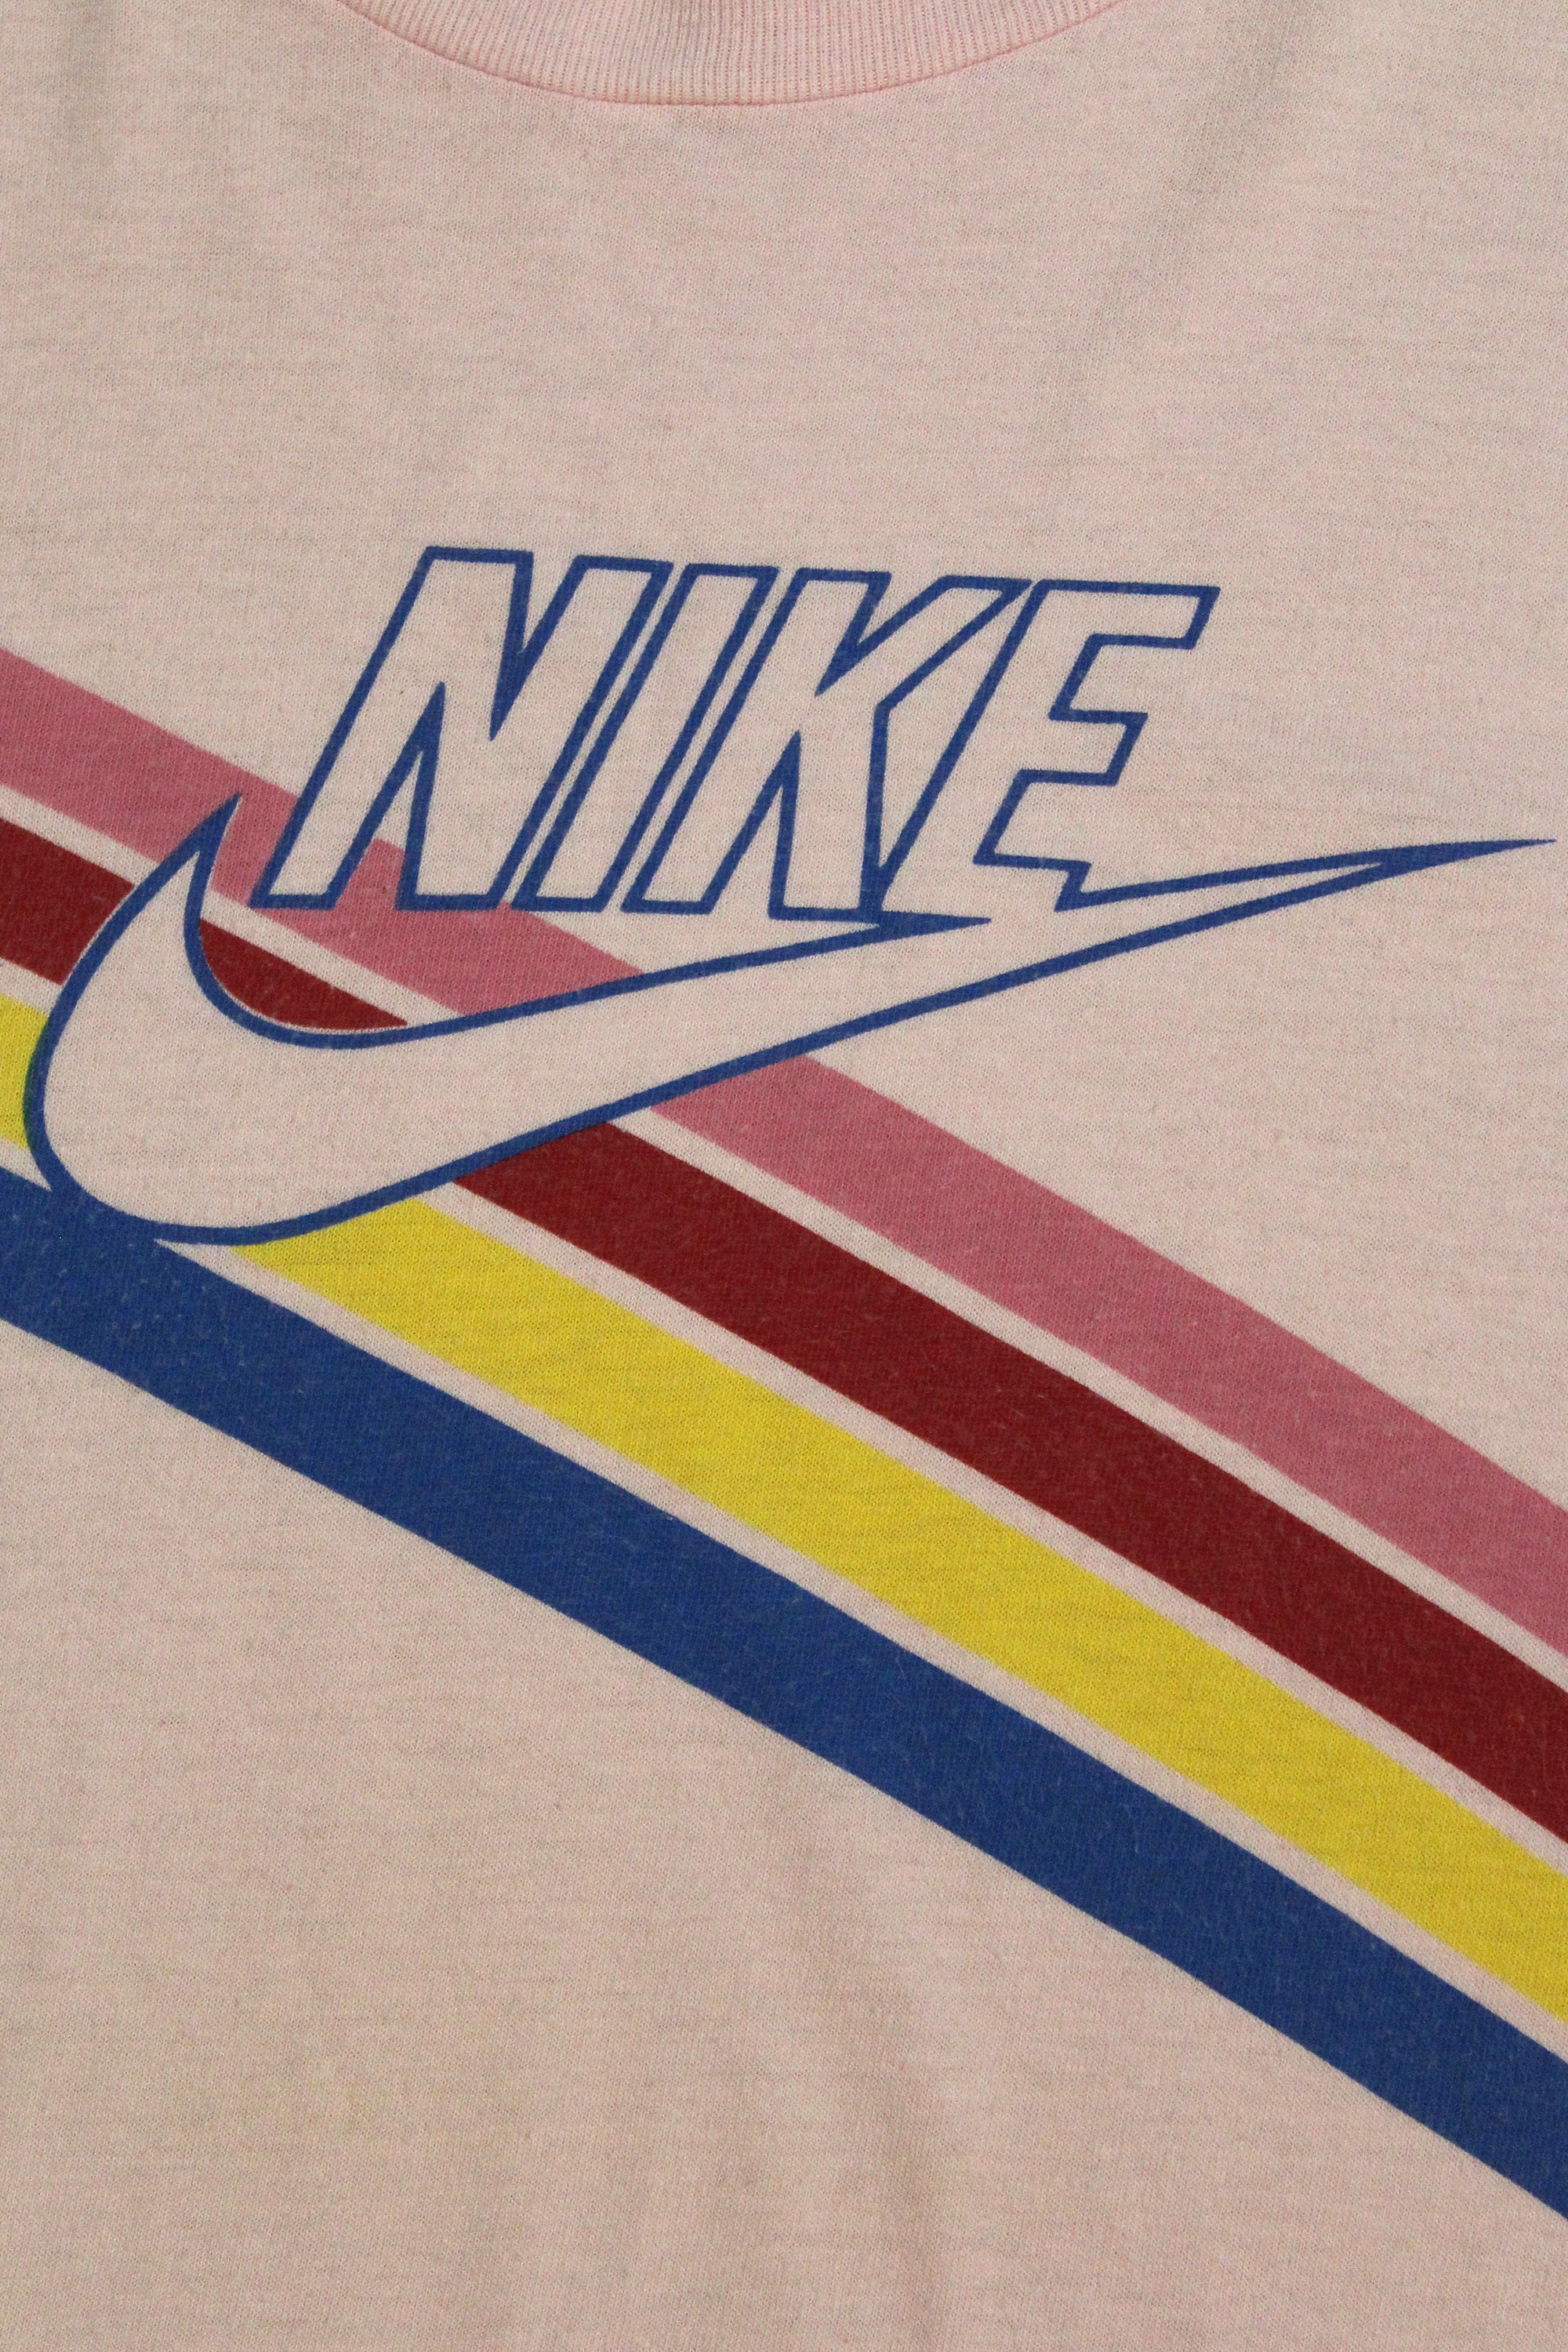 Vintage 1970&#39;s Nike Pink Graphic Made in Italy T-Shirt